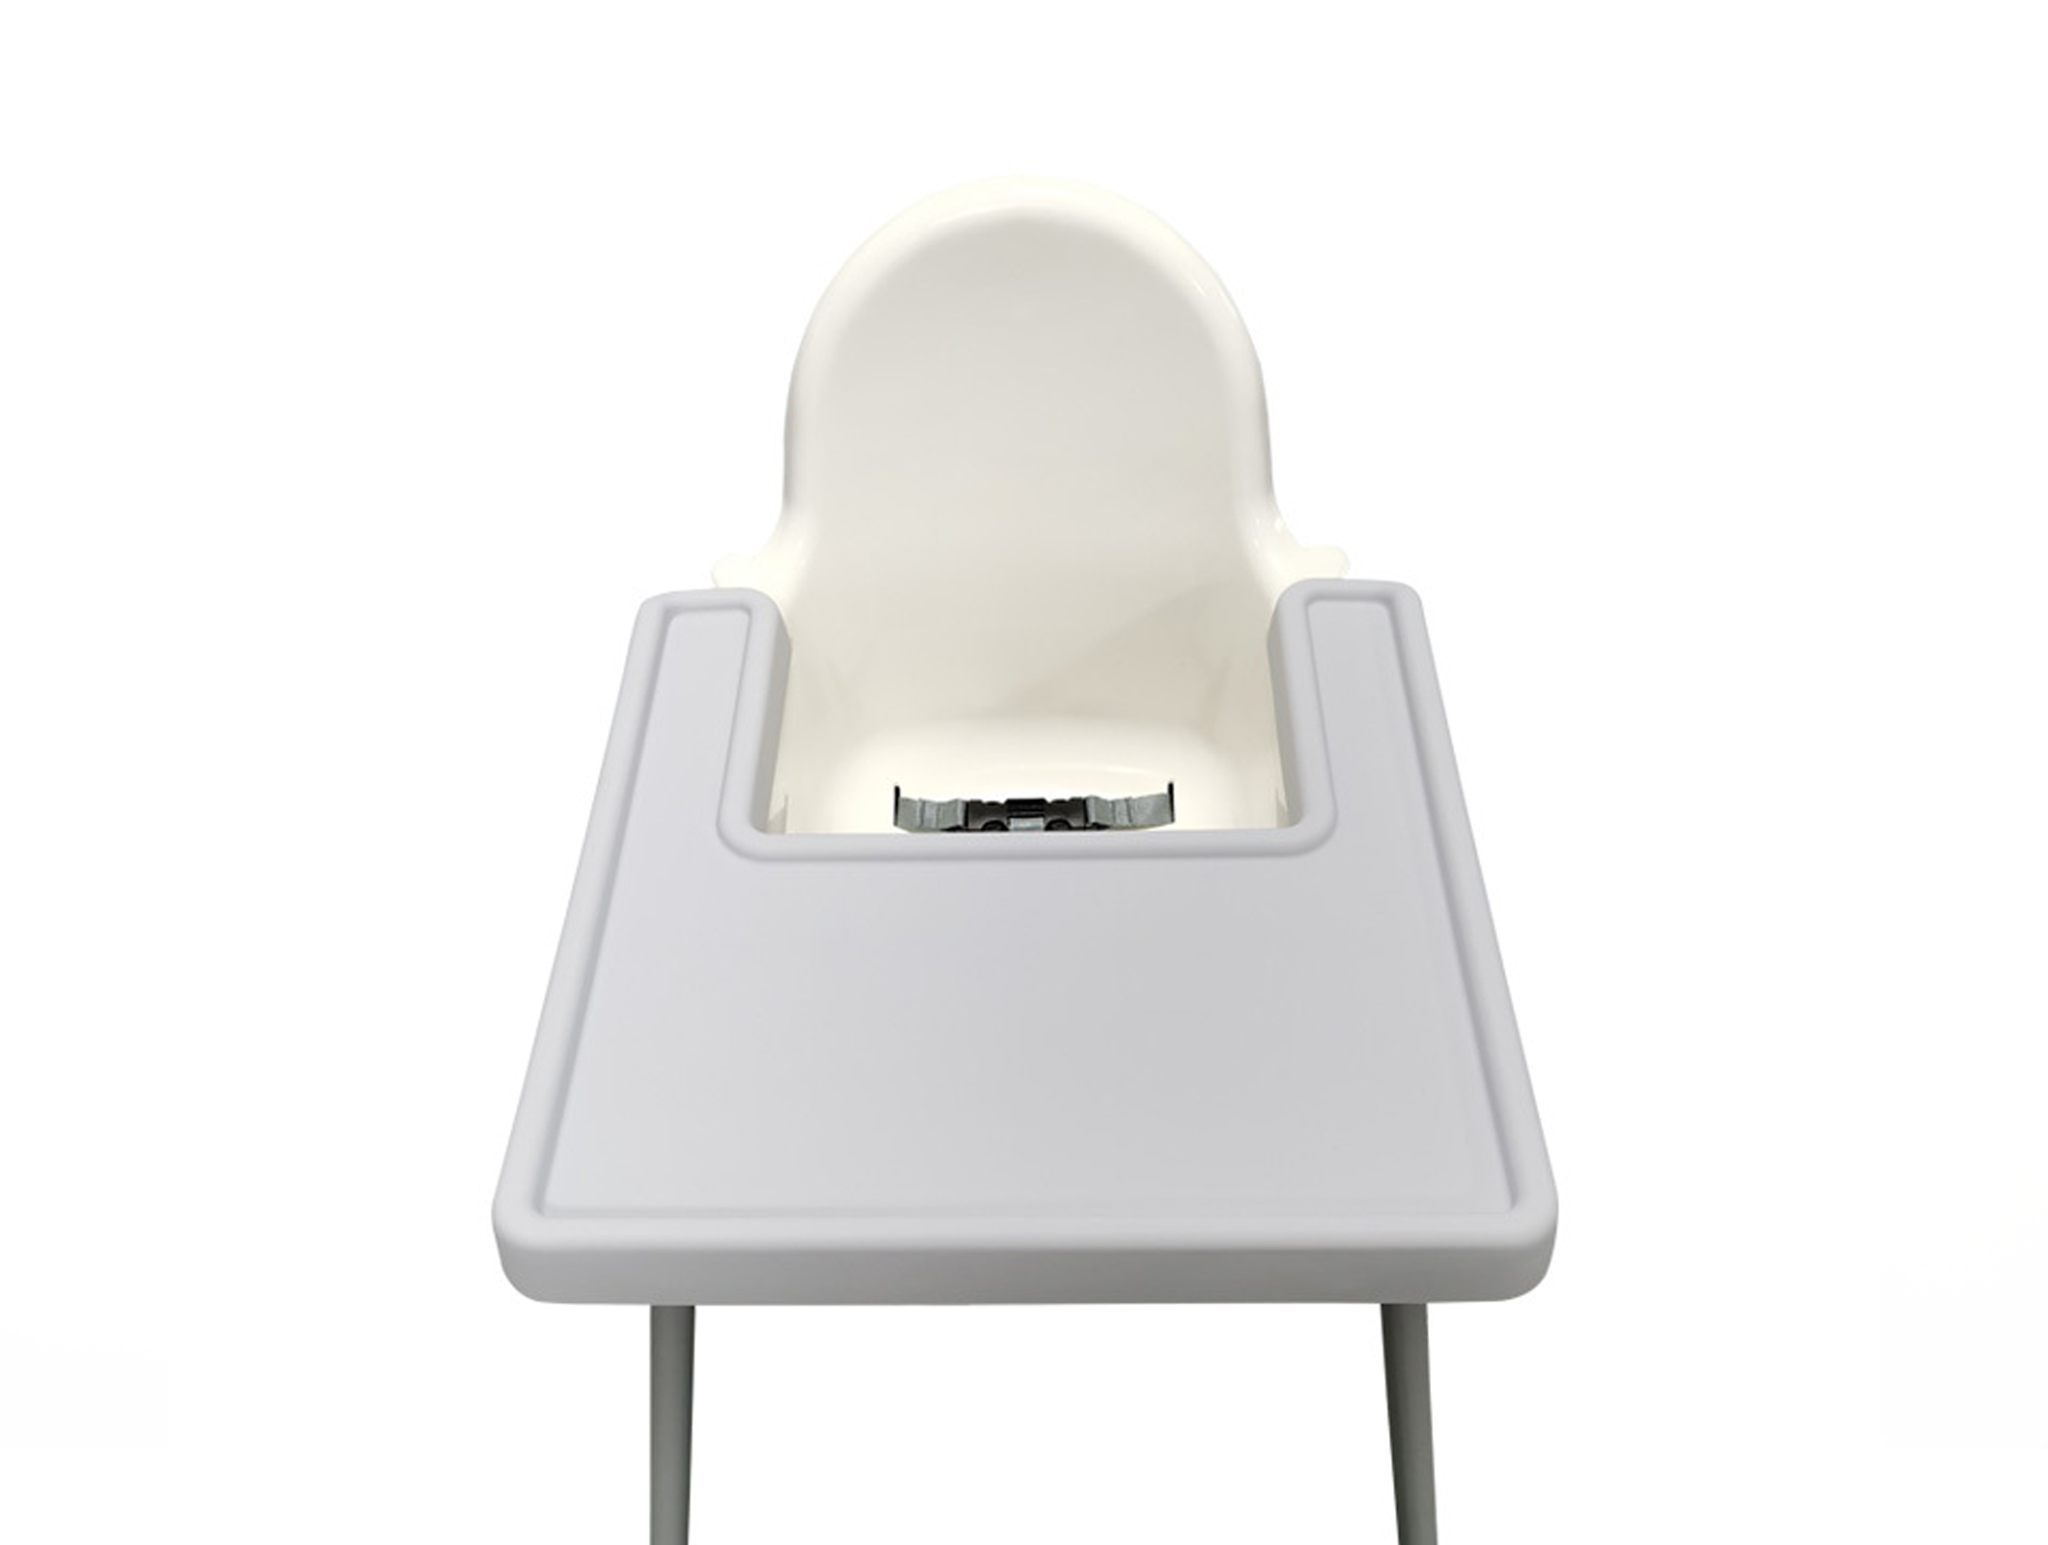 Full Tray mat for IKEA Highchair - Dove Grey